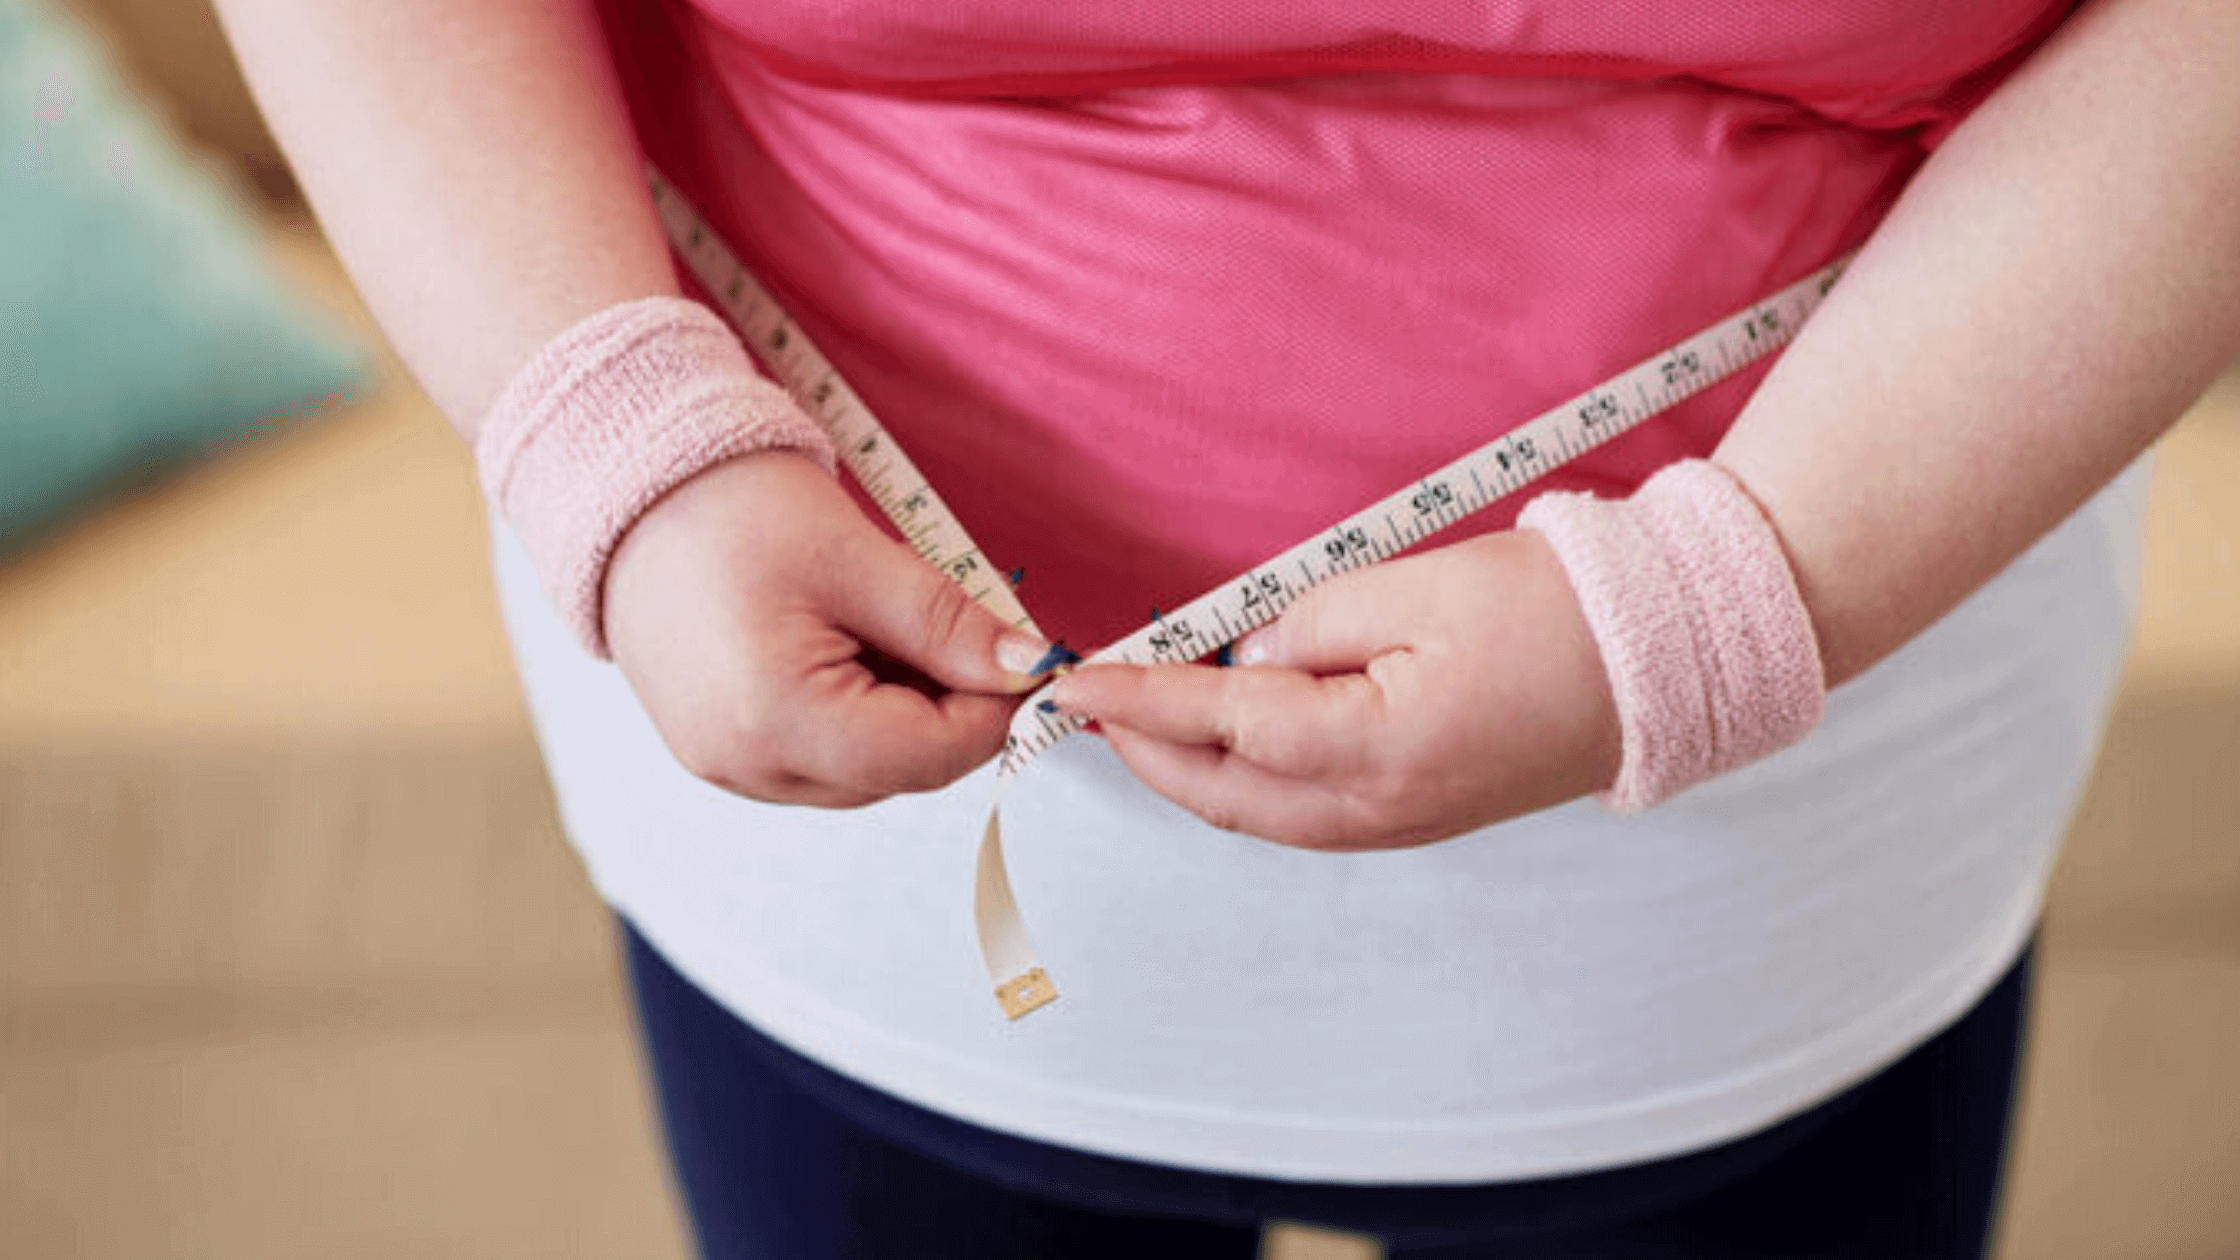 Is Obesity May Affect Kidney Function In Women With Type 2 diabetes